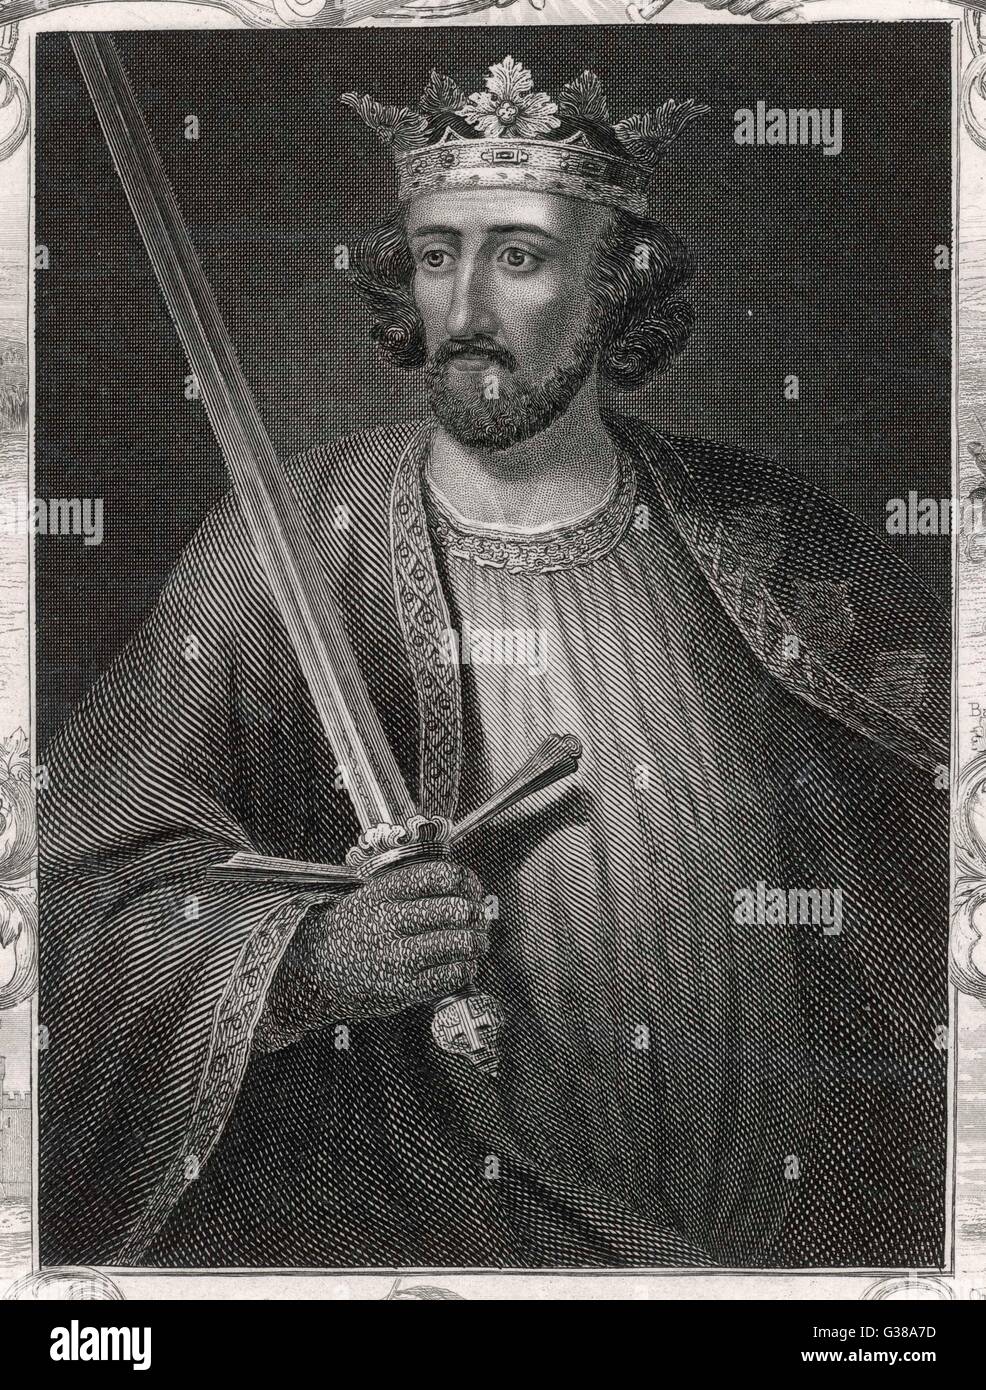 KING EDWARD I  Depicted holding a sword Decorative border showing events from his reign      Date: 1239 - 1307 Stock Photo